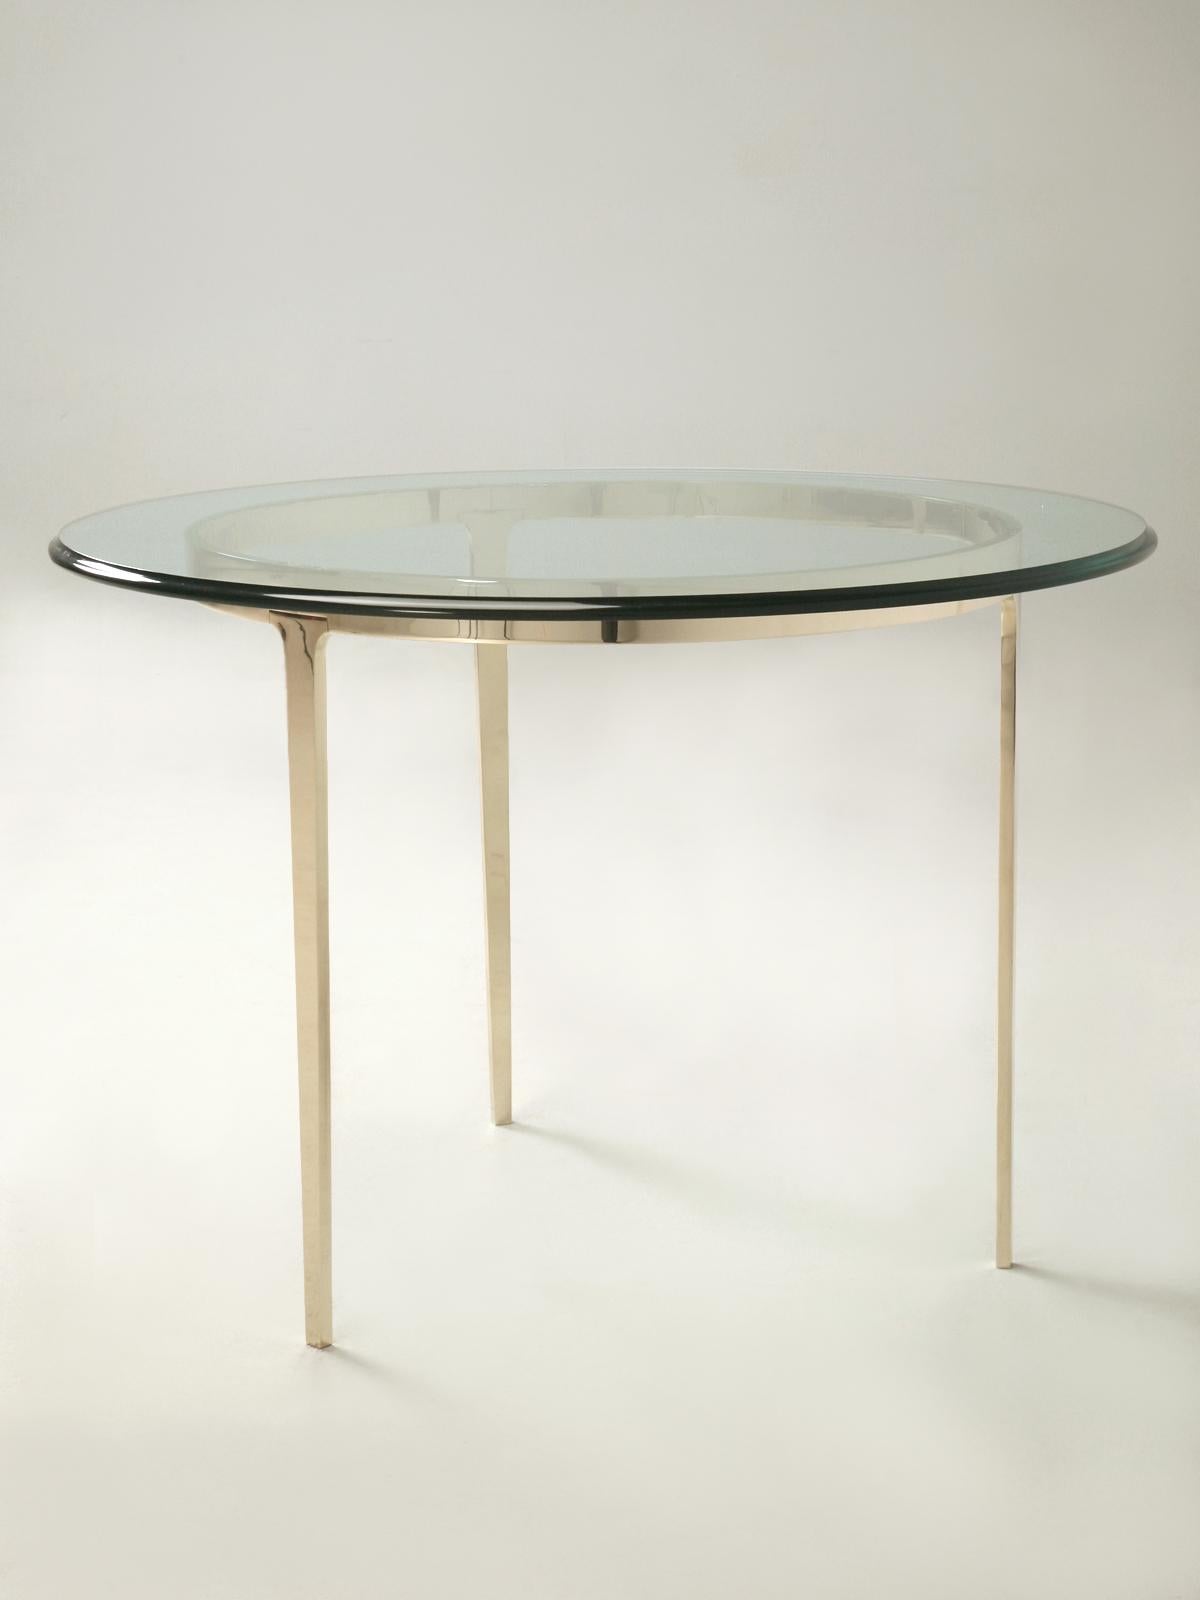 American Custom Handmade Round Center Hall Table in Solid Bronze Available in Most Sizes For Sale